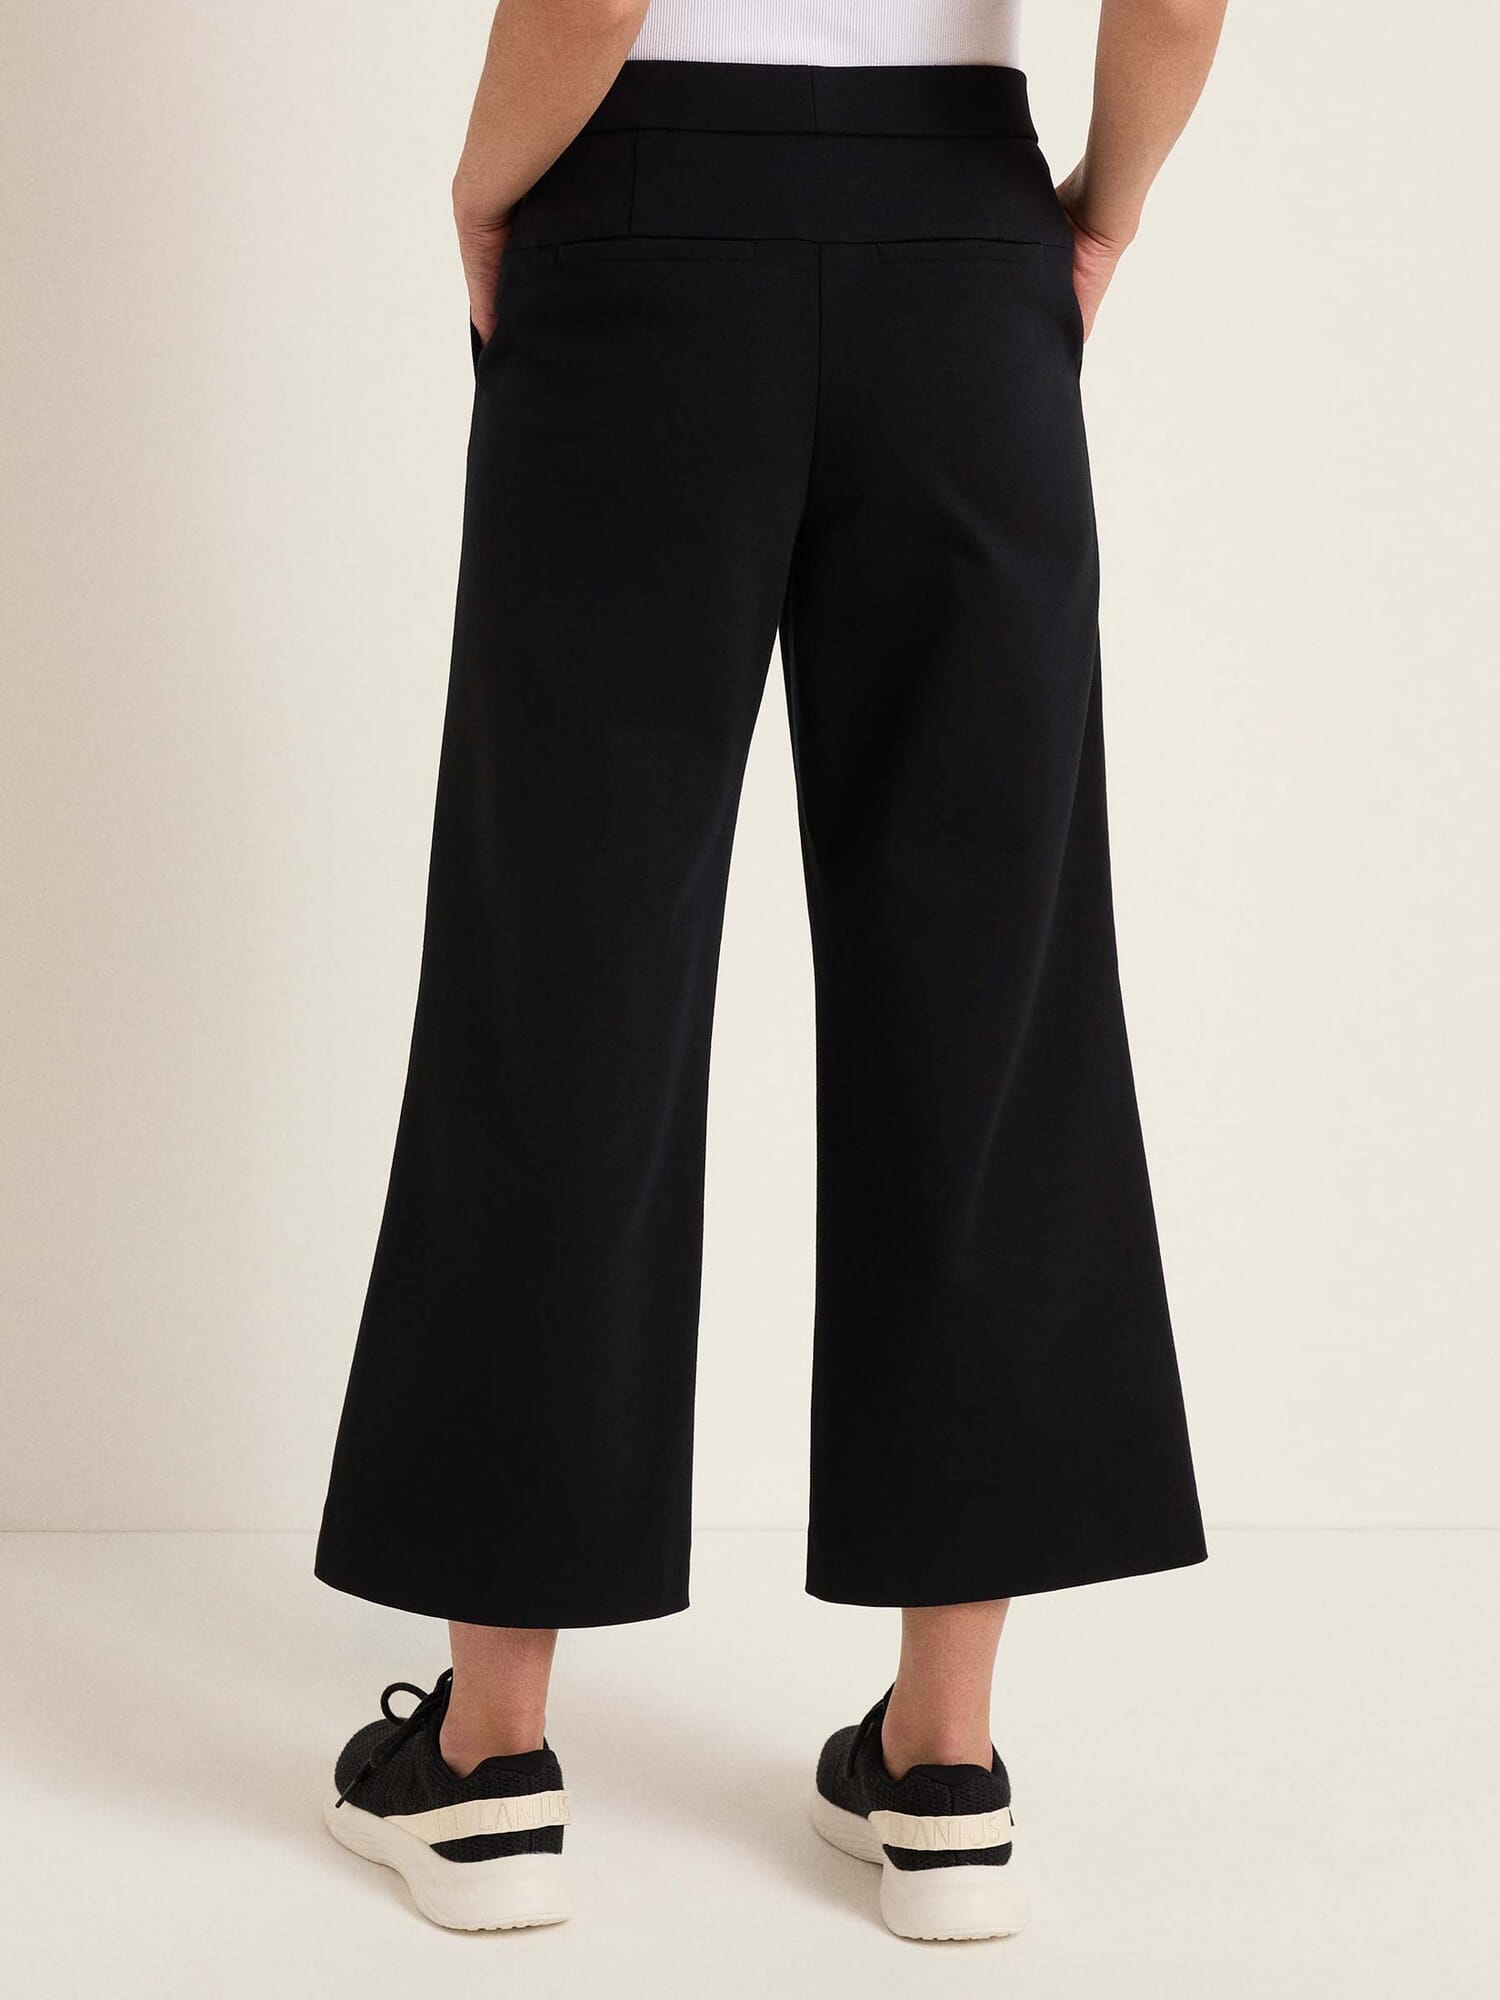 Khaki Elasticated Waist Pull On Culottes | Womens Trousers | Select Fashion  Online